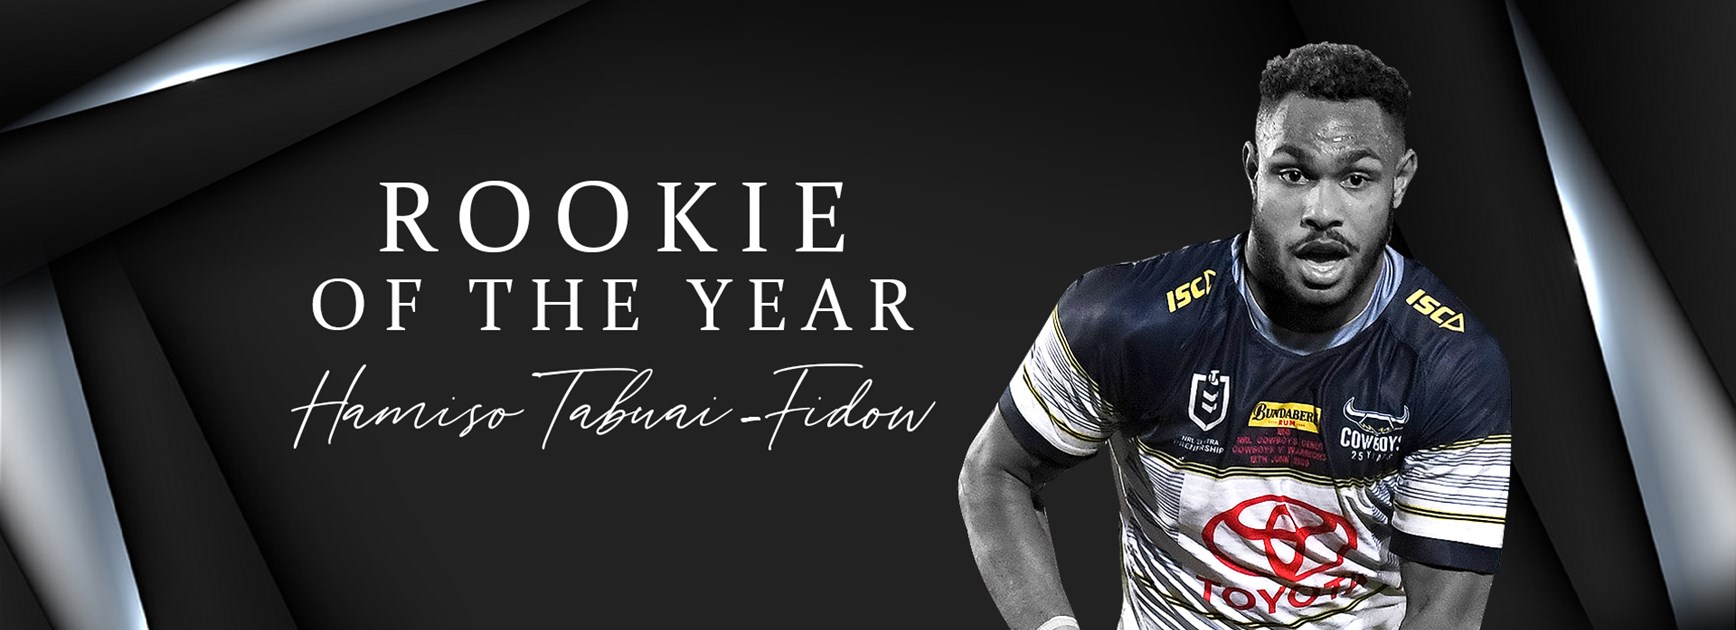 Tabuai-Fidow crowned Rookie of the Year